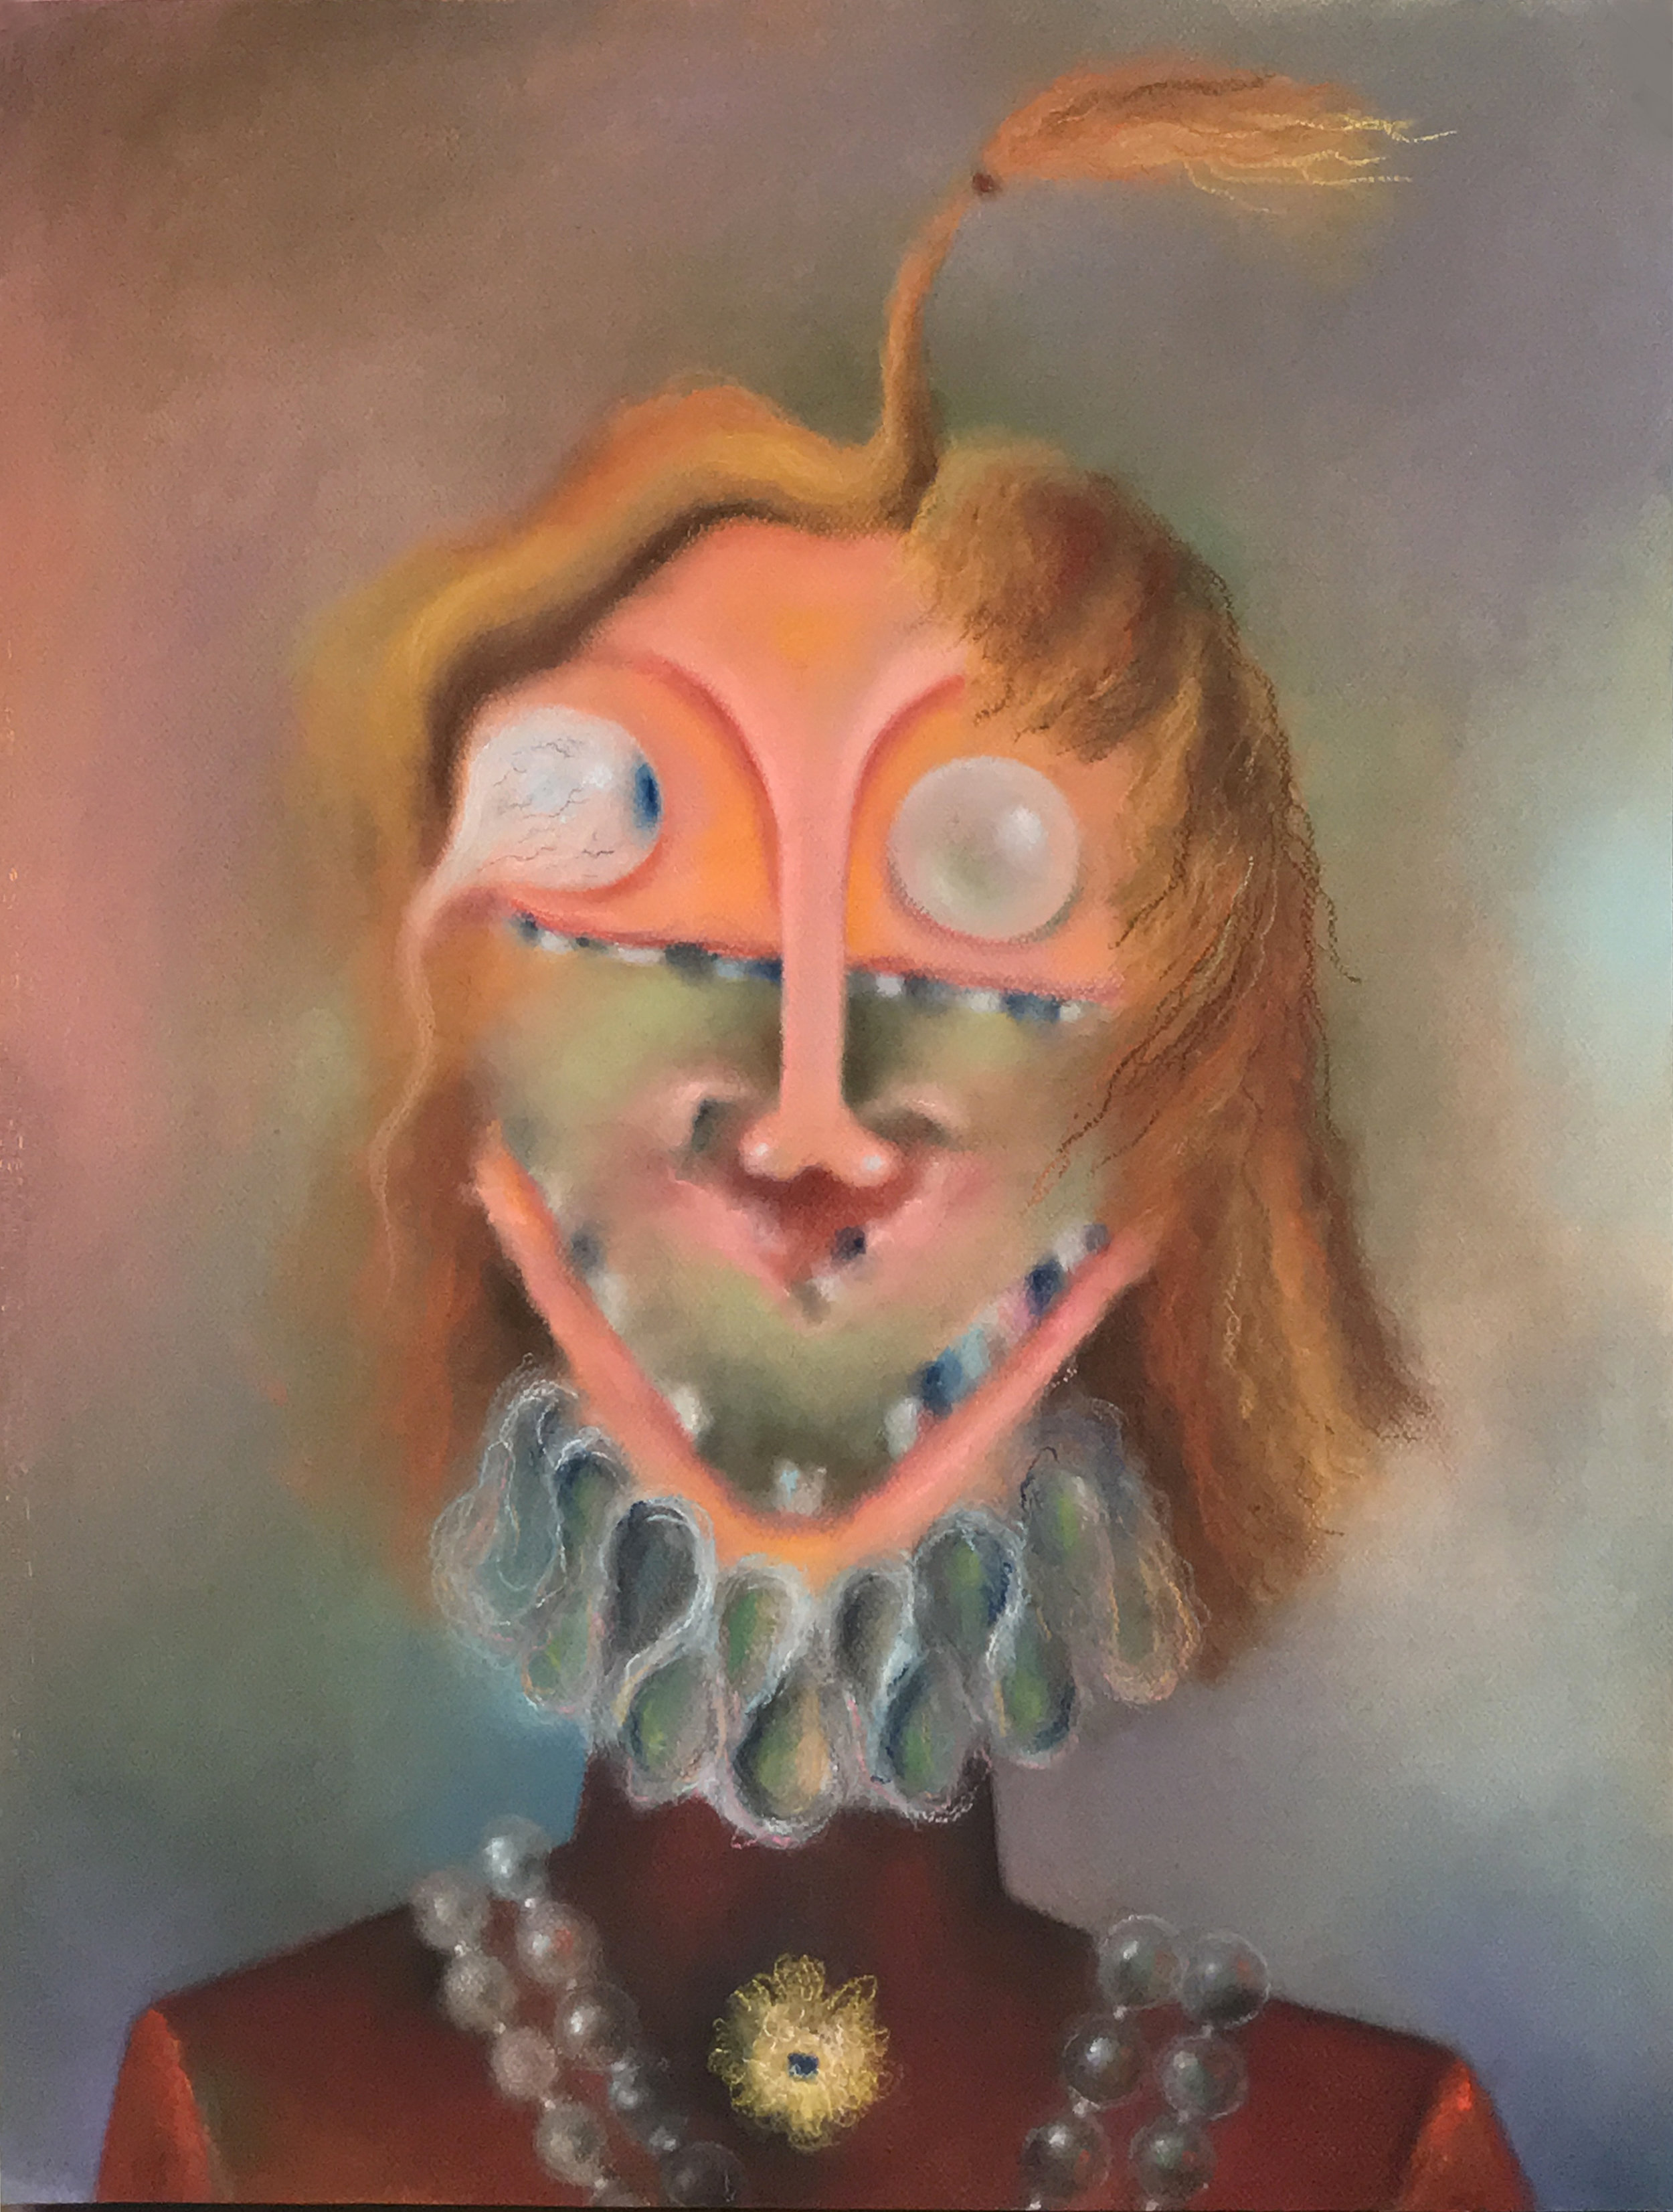  Smiling Through Your Teeth 2018 Pastel on paper. 60x50cm (without frame) 